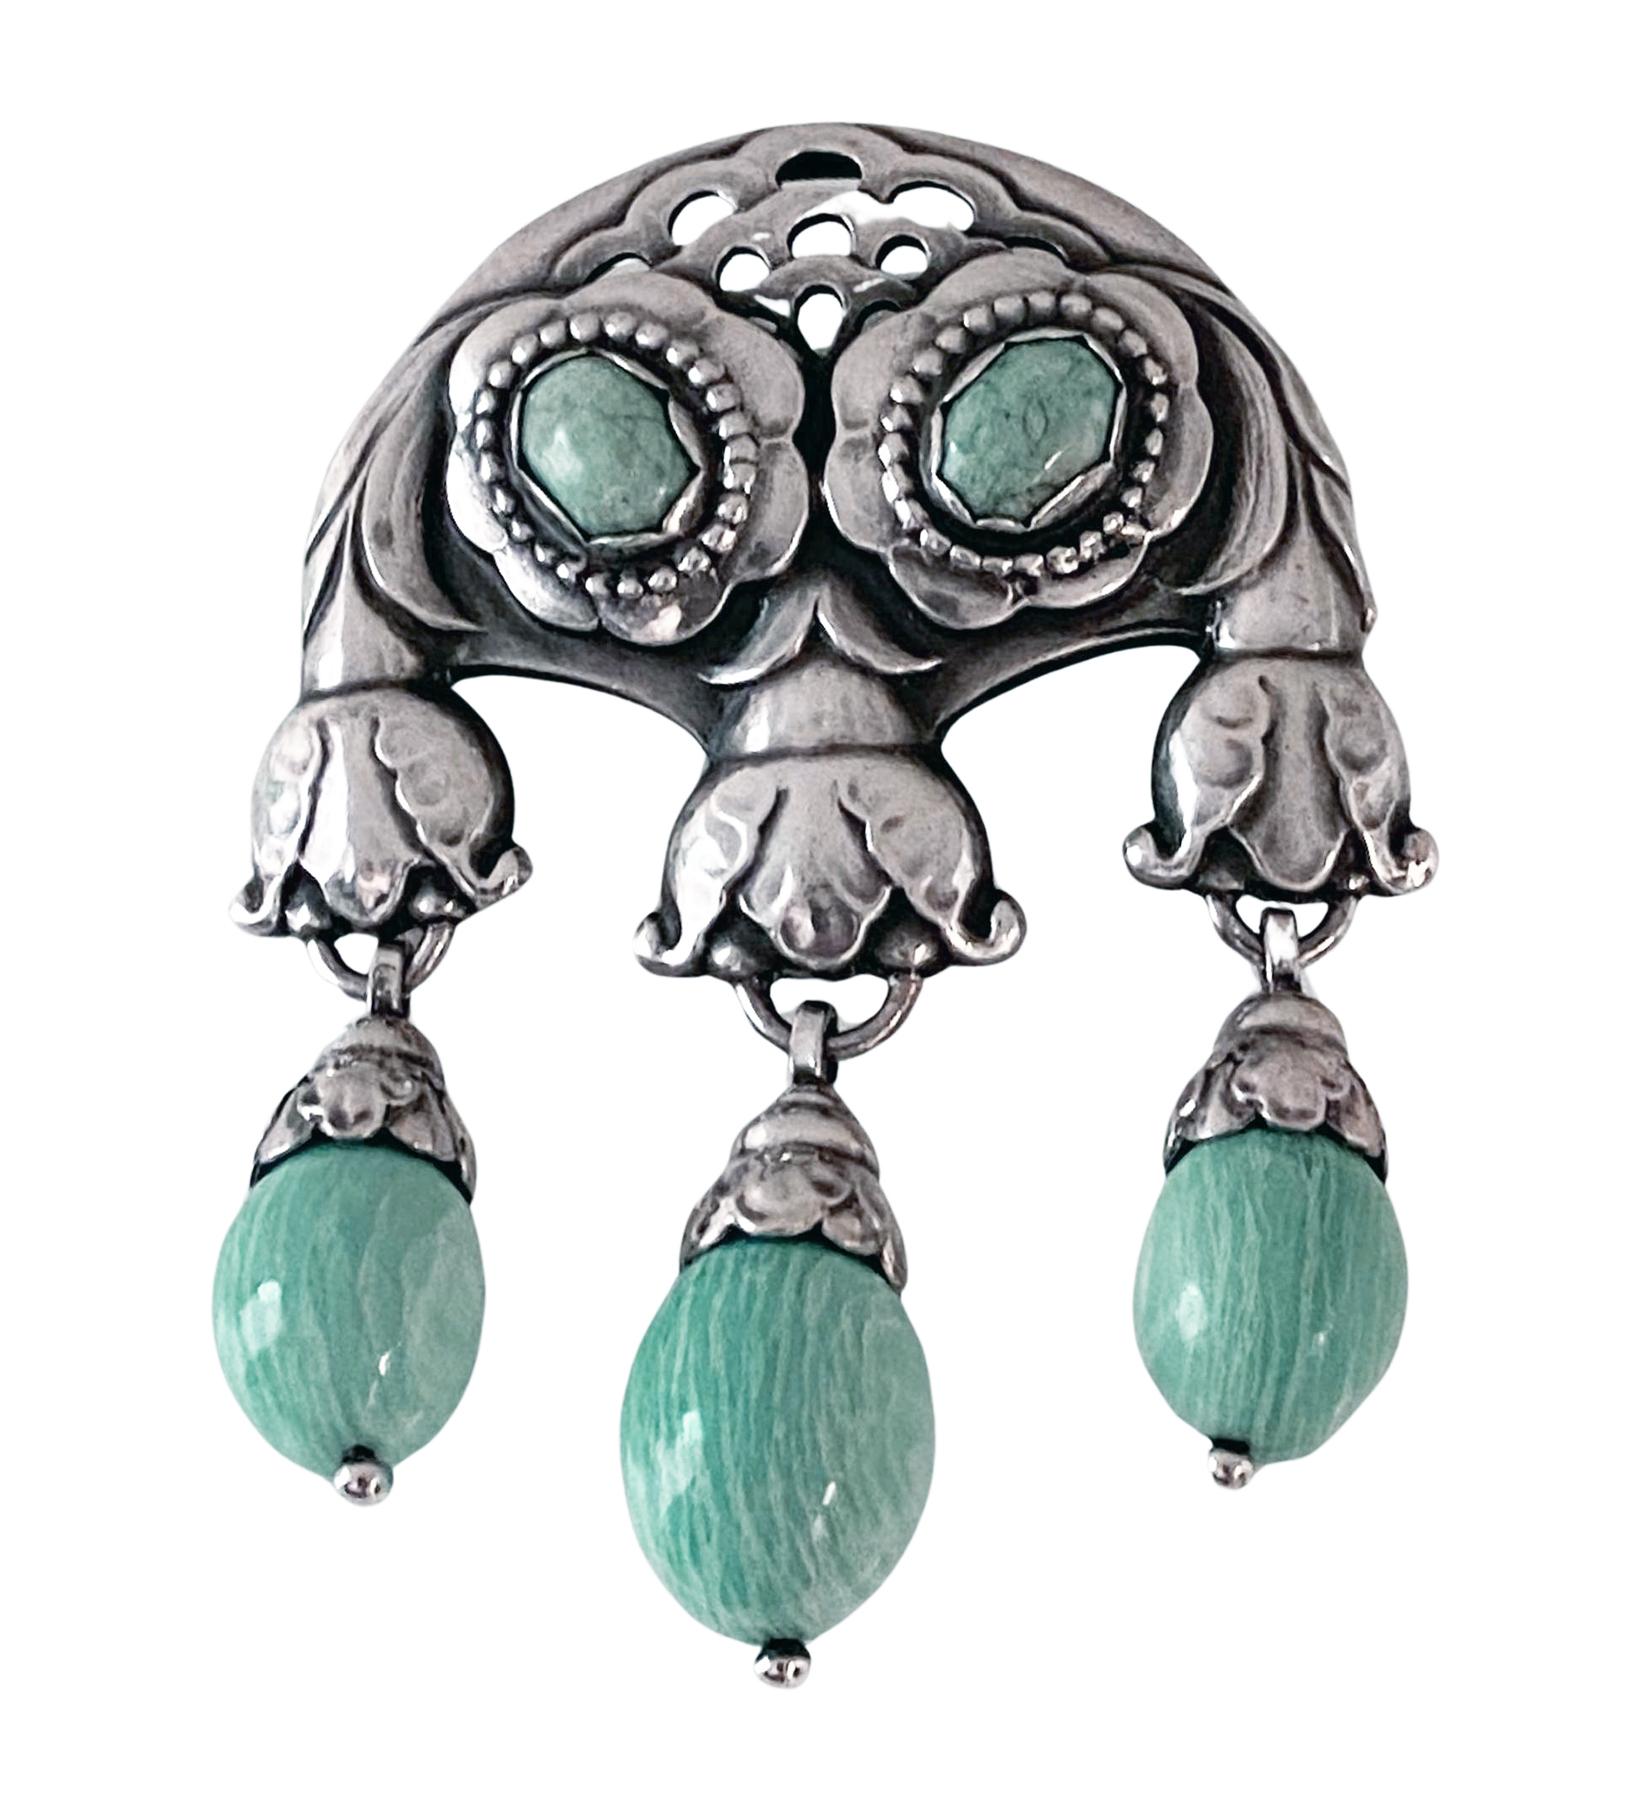 Georg Jensen large rare design Silver Amazonite Master Brooch, C.1933. Designed as foliate motifs set with 2 oval amazonite and suspending three amazonite acorn shaped drops. Measures: 9.00 x 6.50 cm, 1933-44 marks GJ in box 925 Sterling Denmark